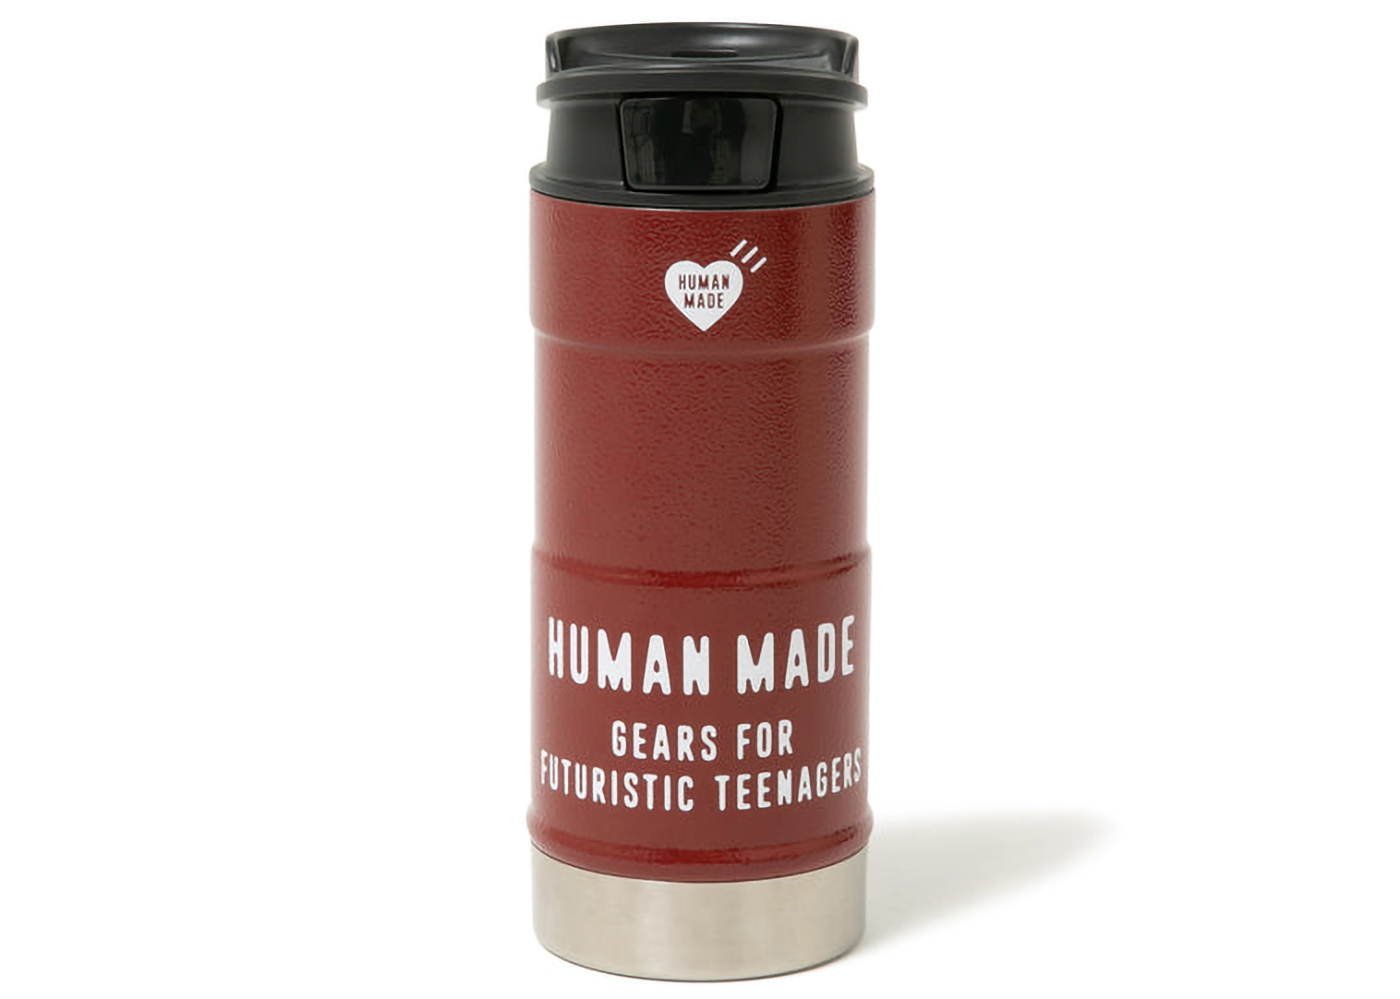 HUMAN MADE THERMO STAINLESS BOTTLE